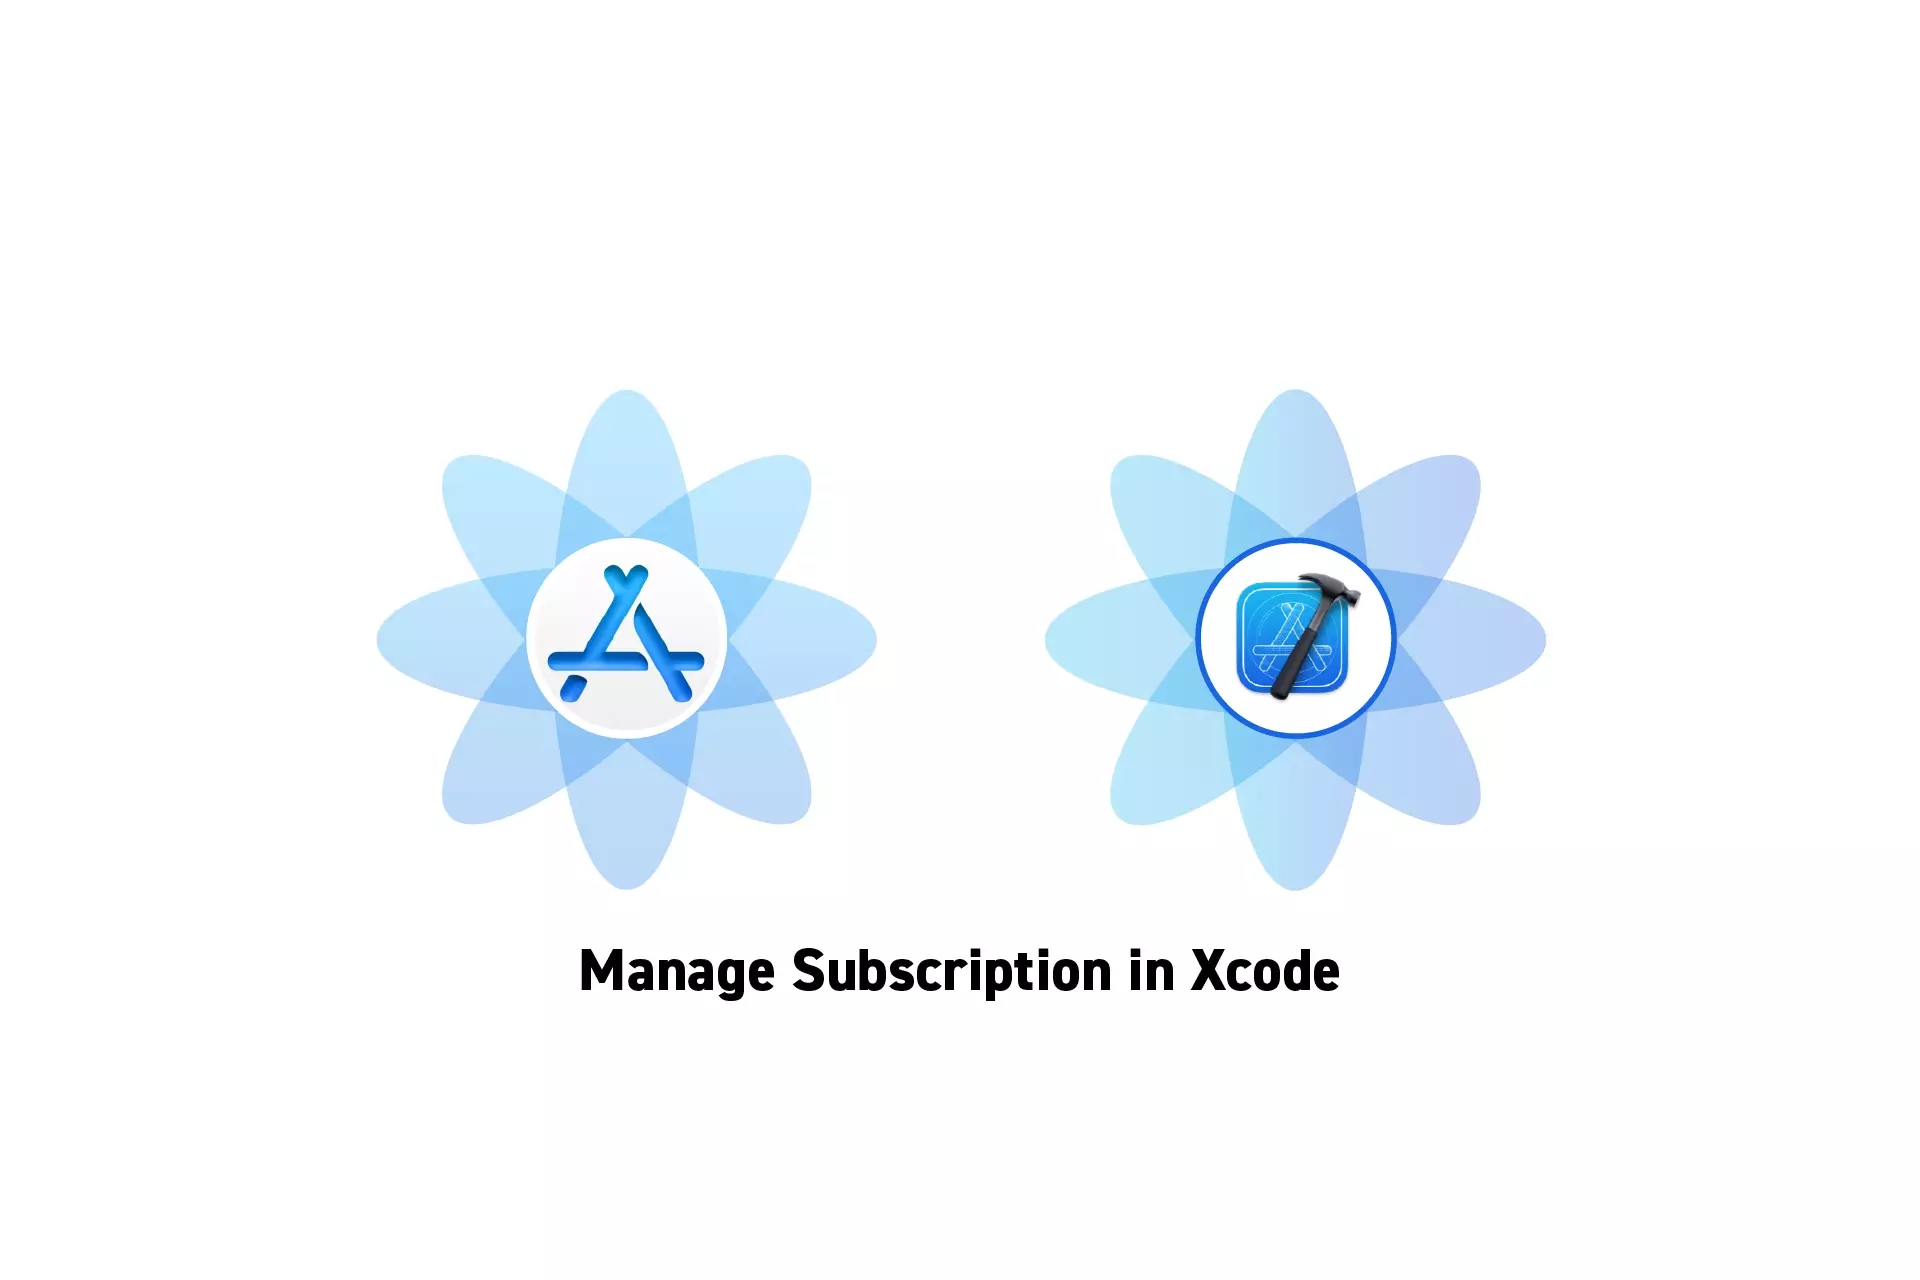 Two flowers that represent StoreKit and XCode side by side. Beneath them sits the text “Manage Subscription in Xcode.”